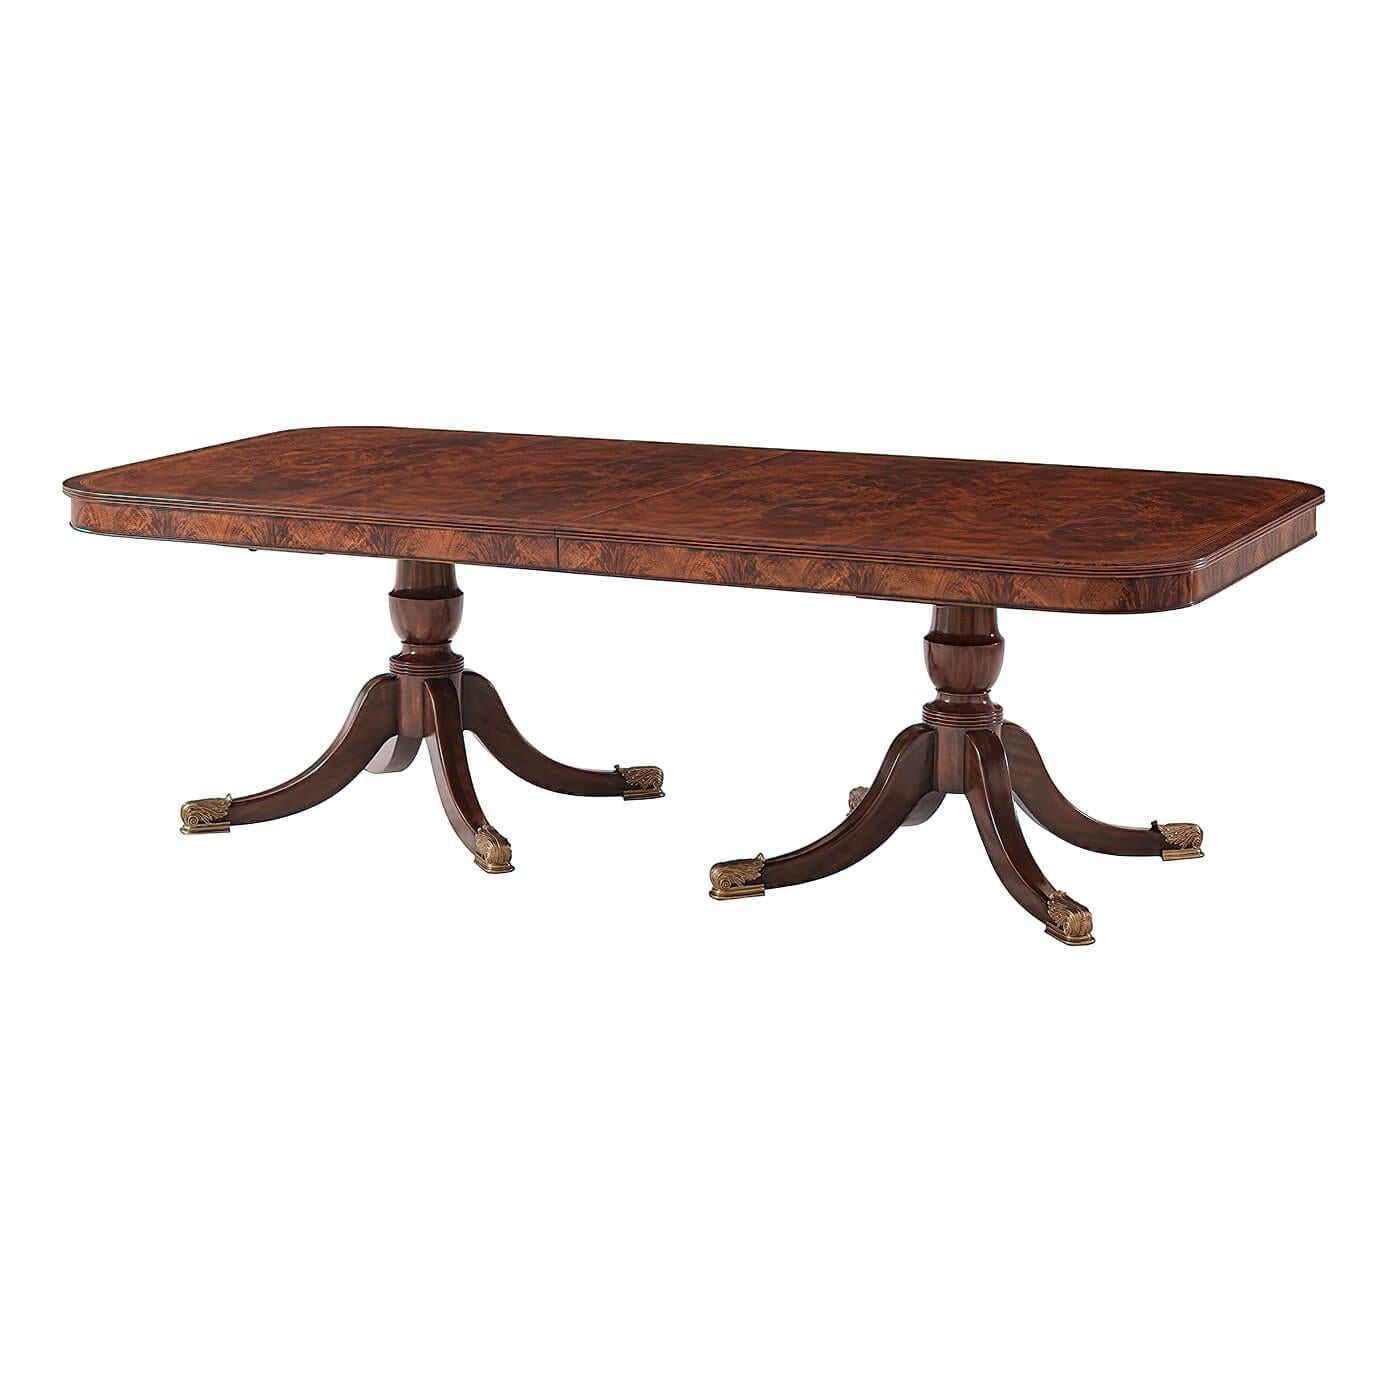 A fine Regency style mahogany and flame veneered extending dining table, the rectangular reeded edge top with rounded corners crossbanded in chestnut burl and morado, with two additional self storing leaves, above a mahogany apron, on two baluster